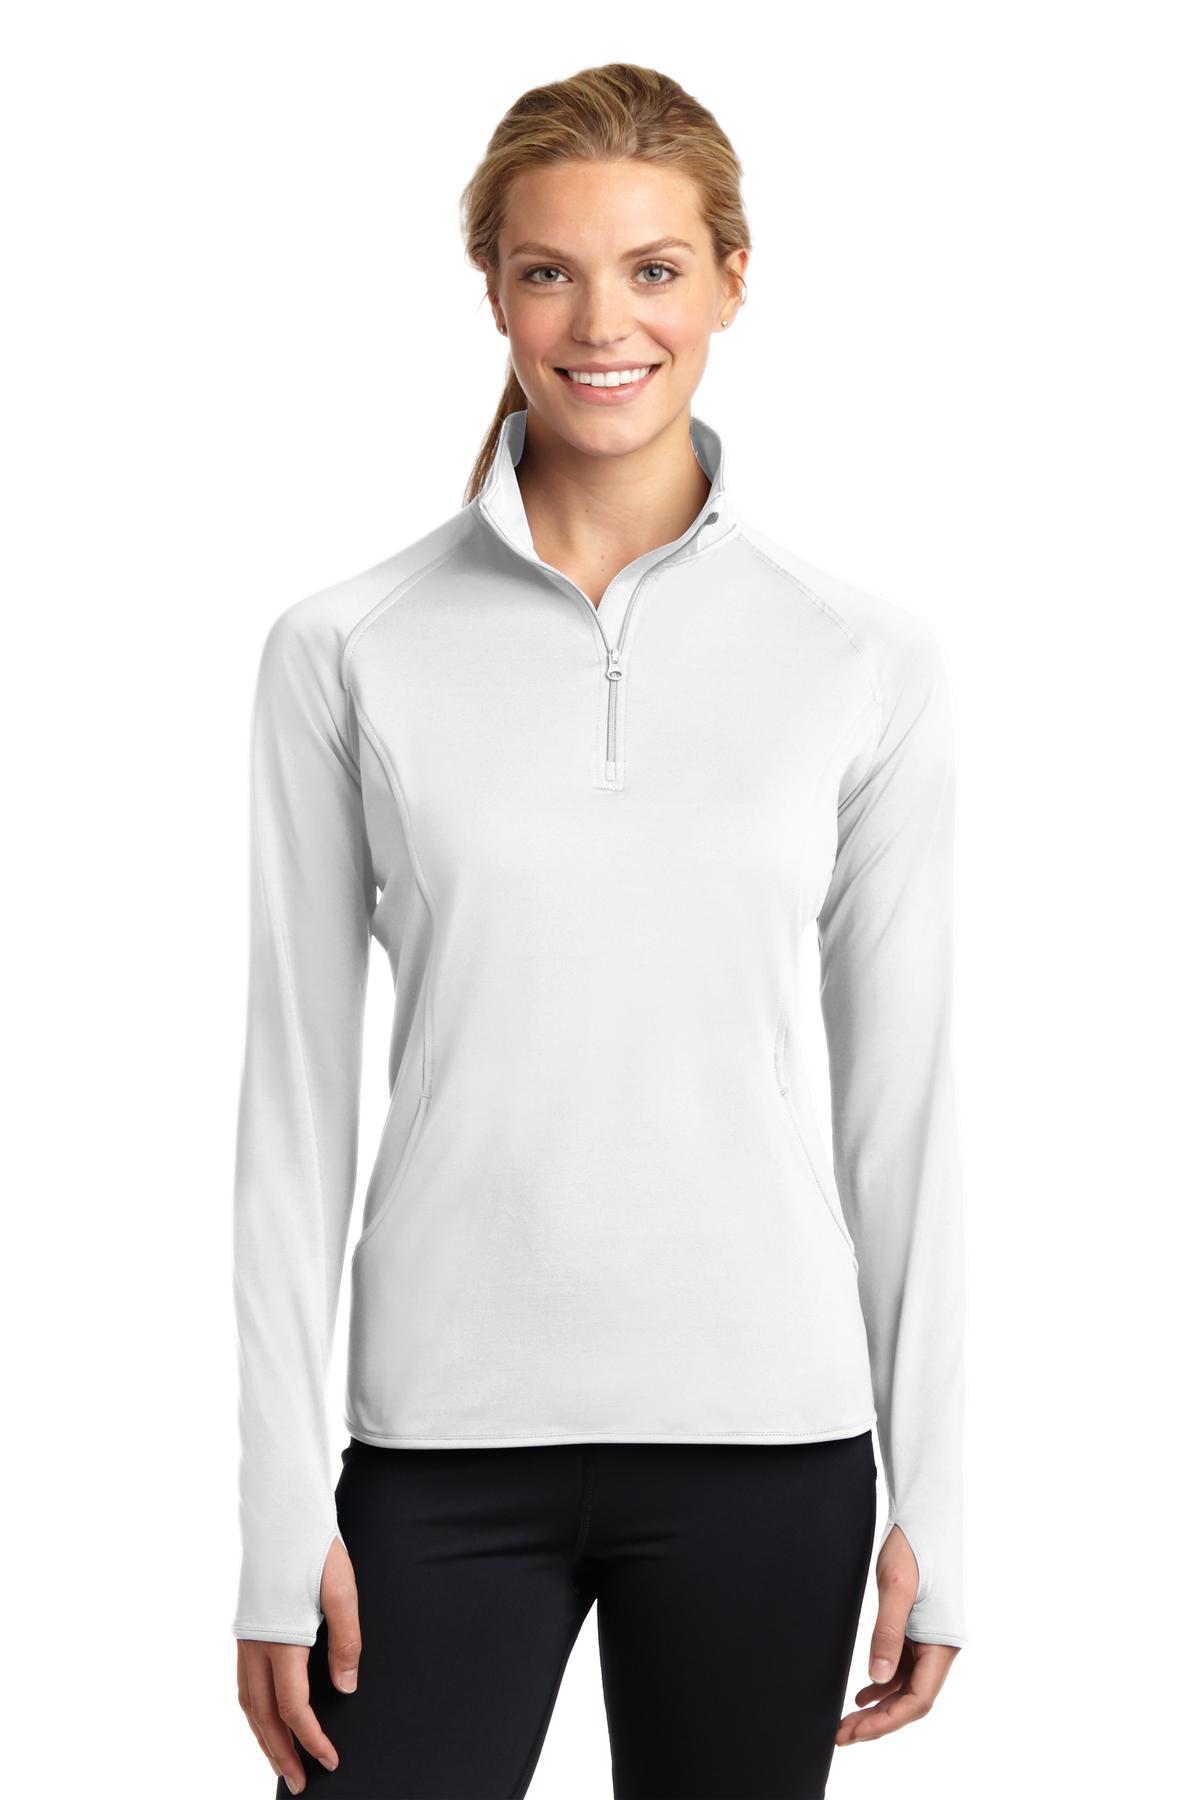 Spyder Women's Tempting Zip T-Neck – Ladies Pullover Long Sleeve Active  Shirt, X-Small, White at  Women's Clothing store